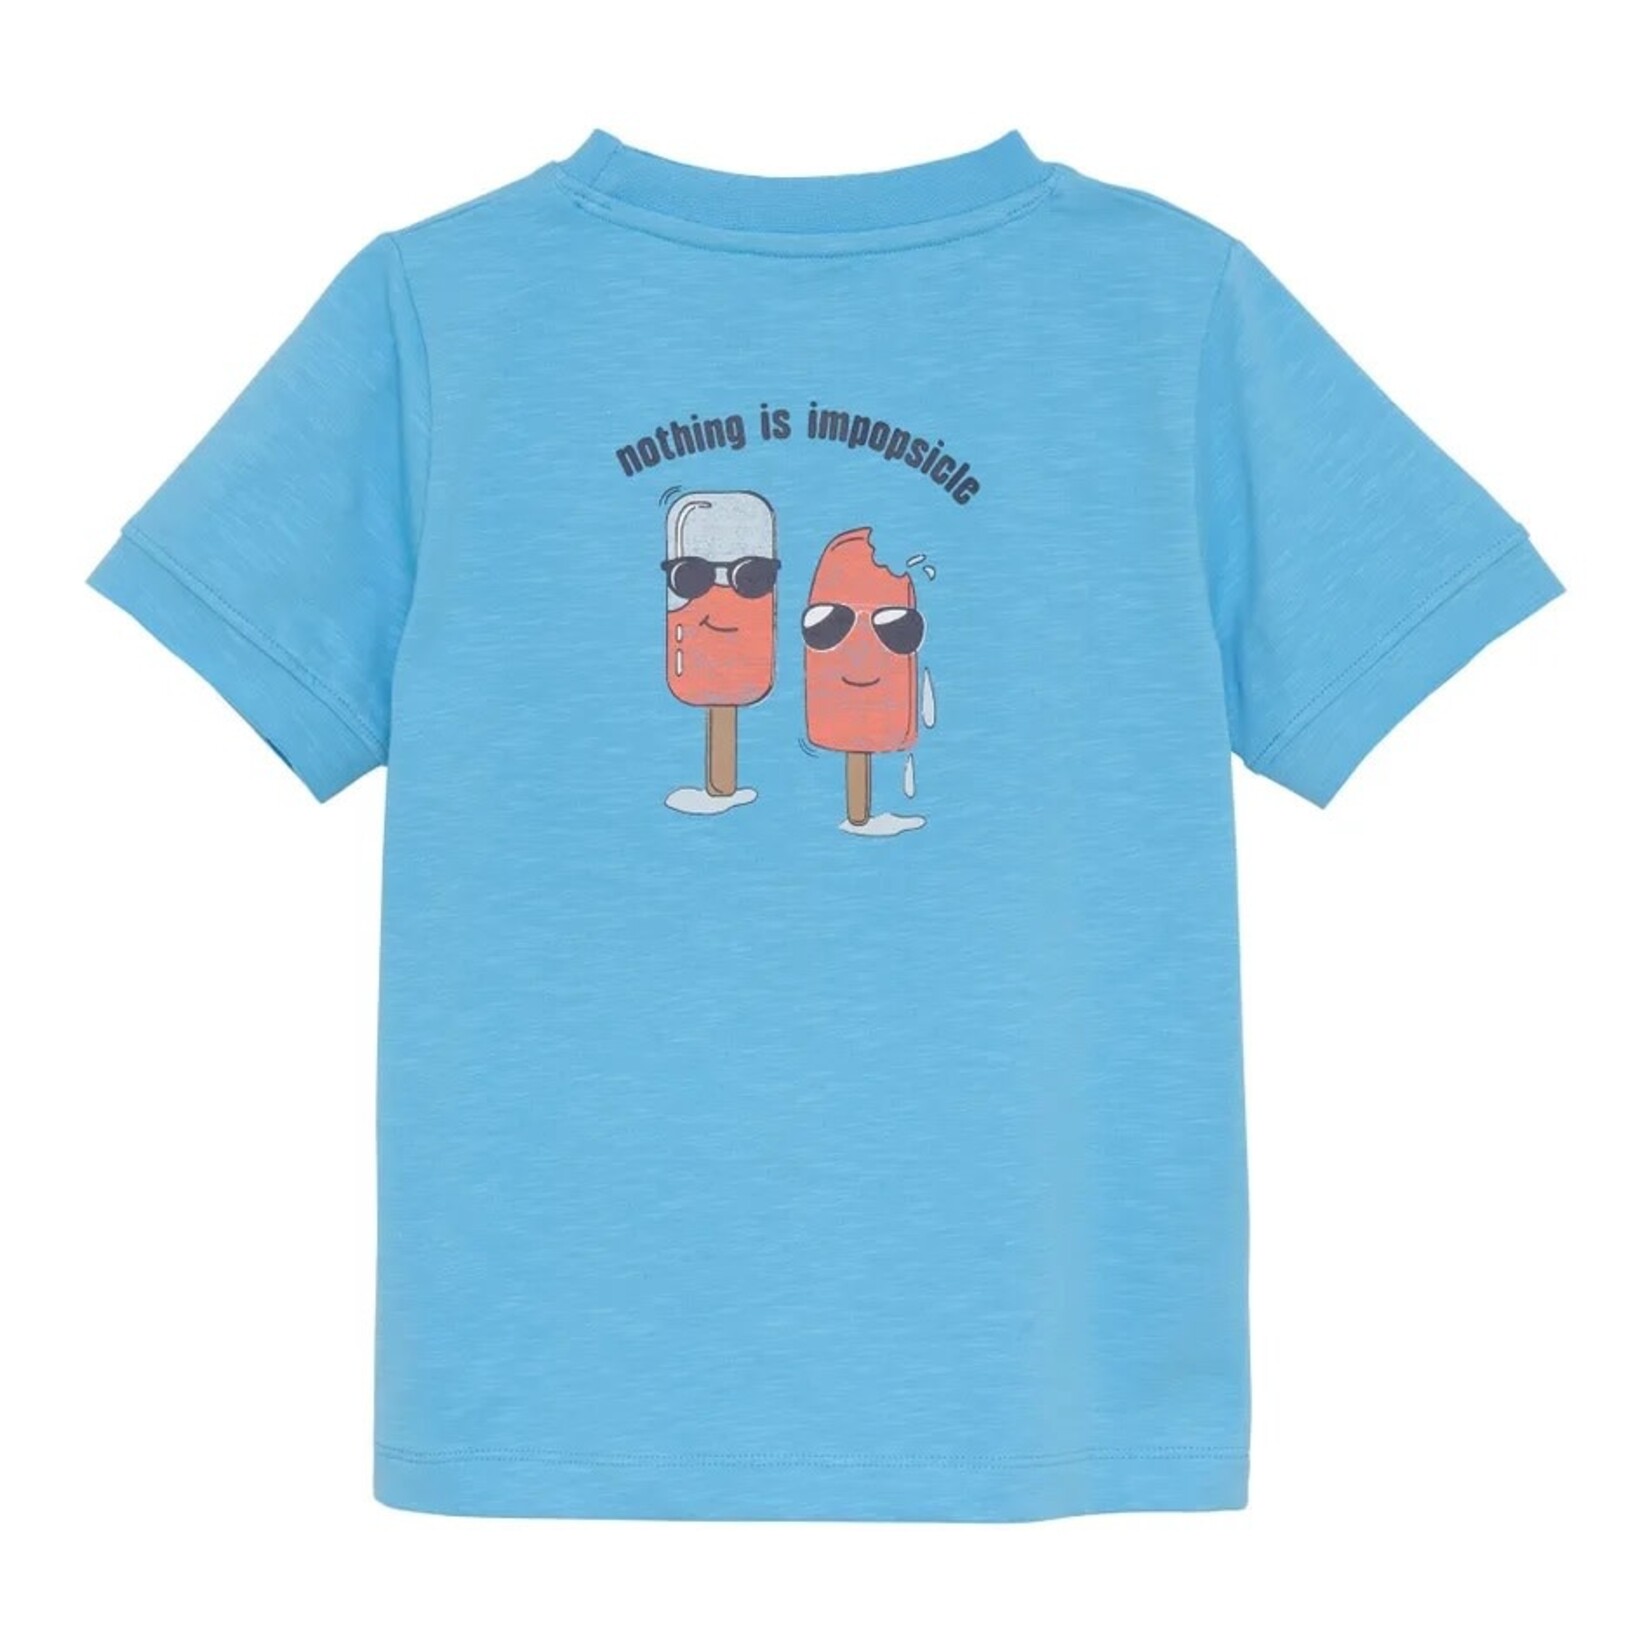 Minymo MINYMO - Light blue t-shirt with popsicle print 'Nothing is impopsicle'